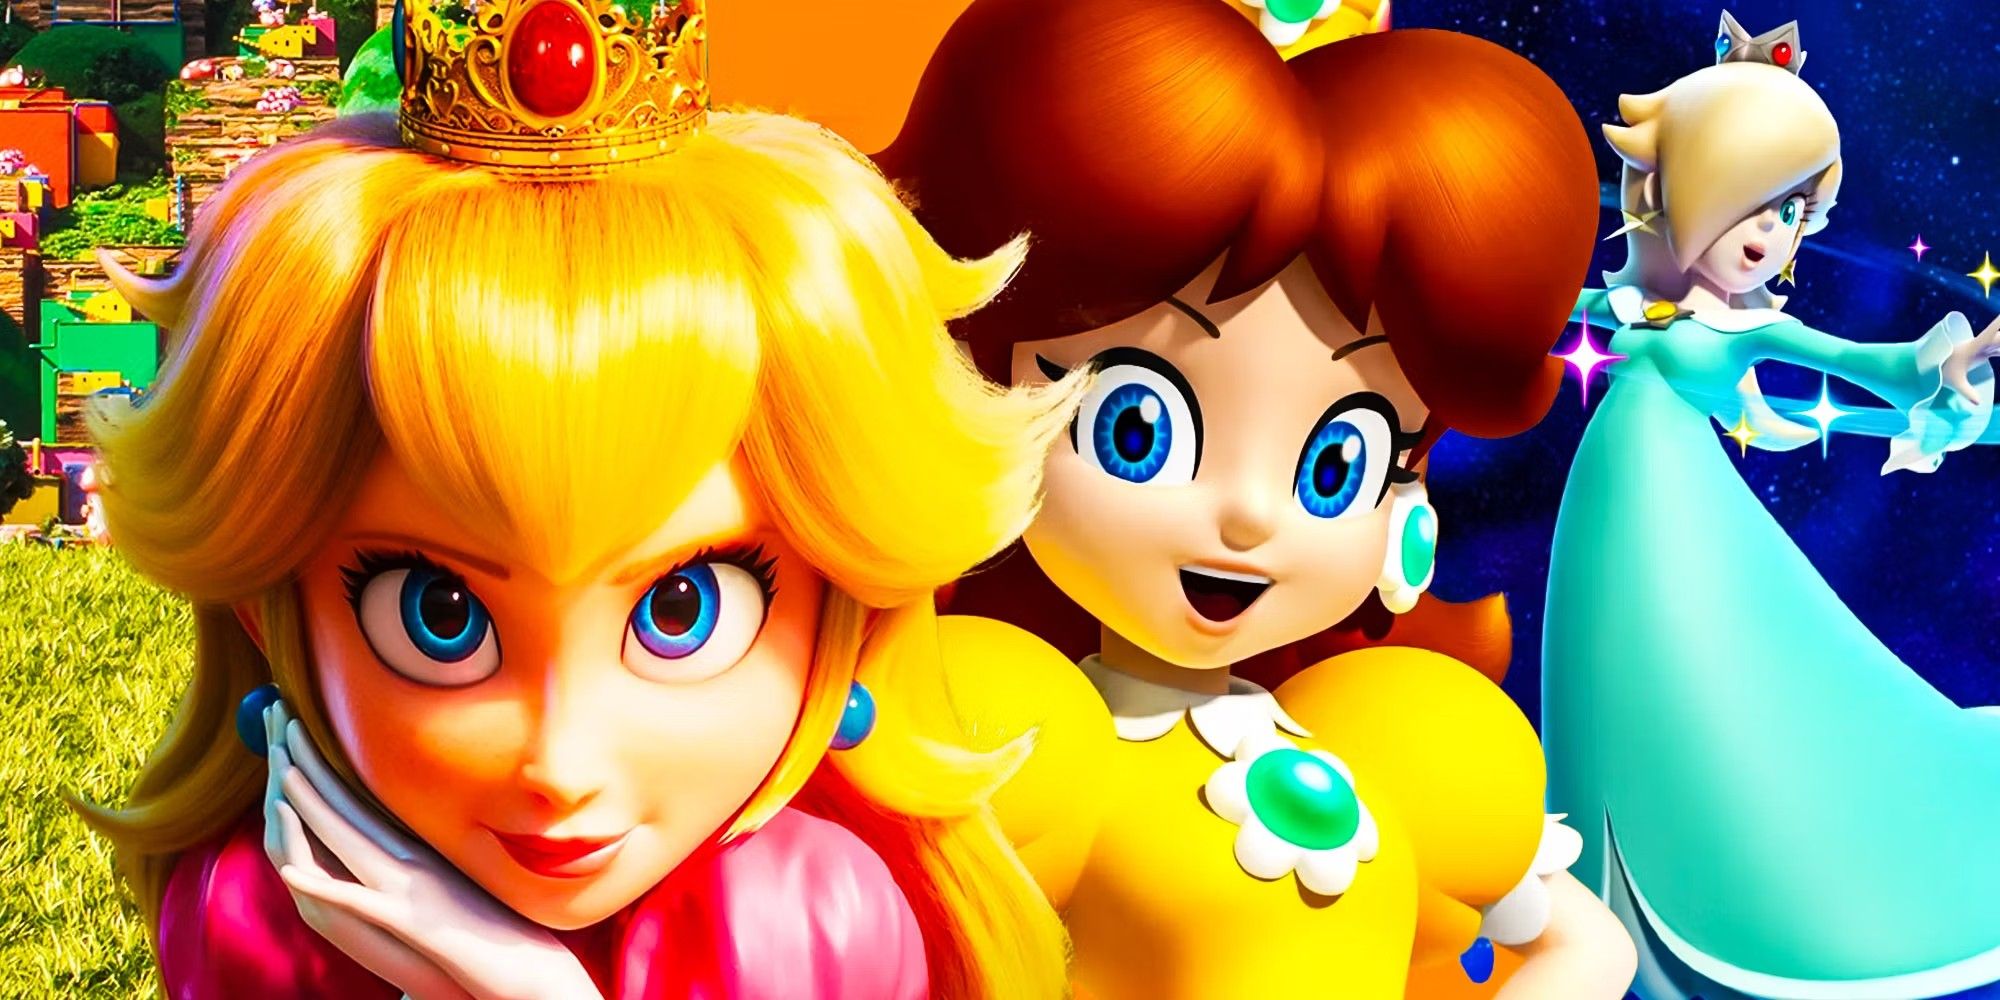 Super Mario Bros. Movie Gives Peach Redemption For Nintendo's Female Characters